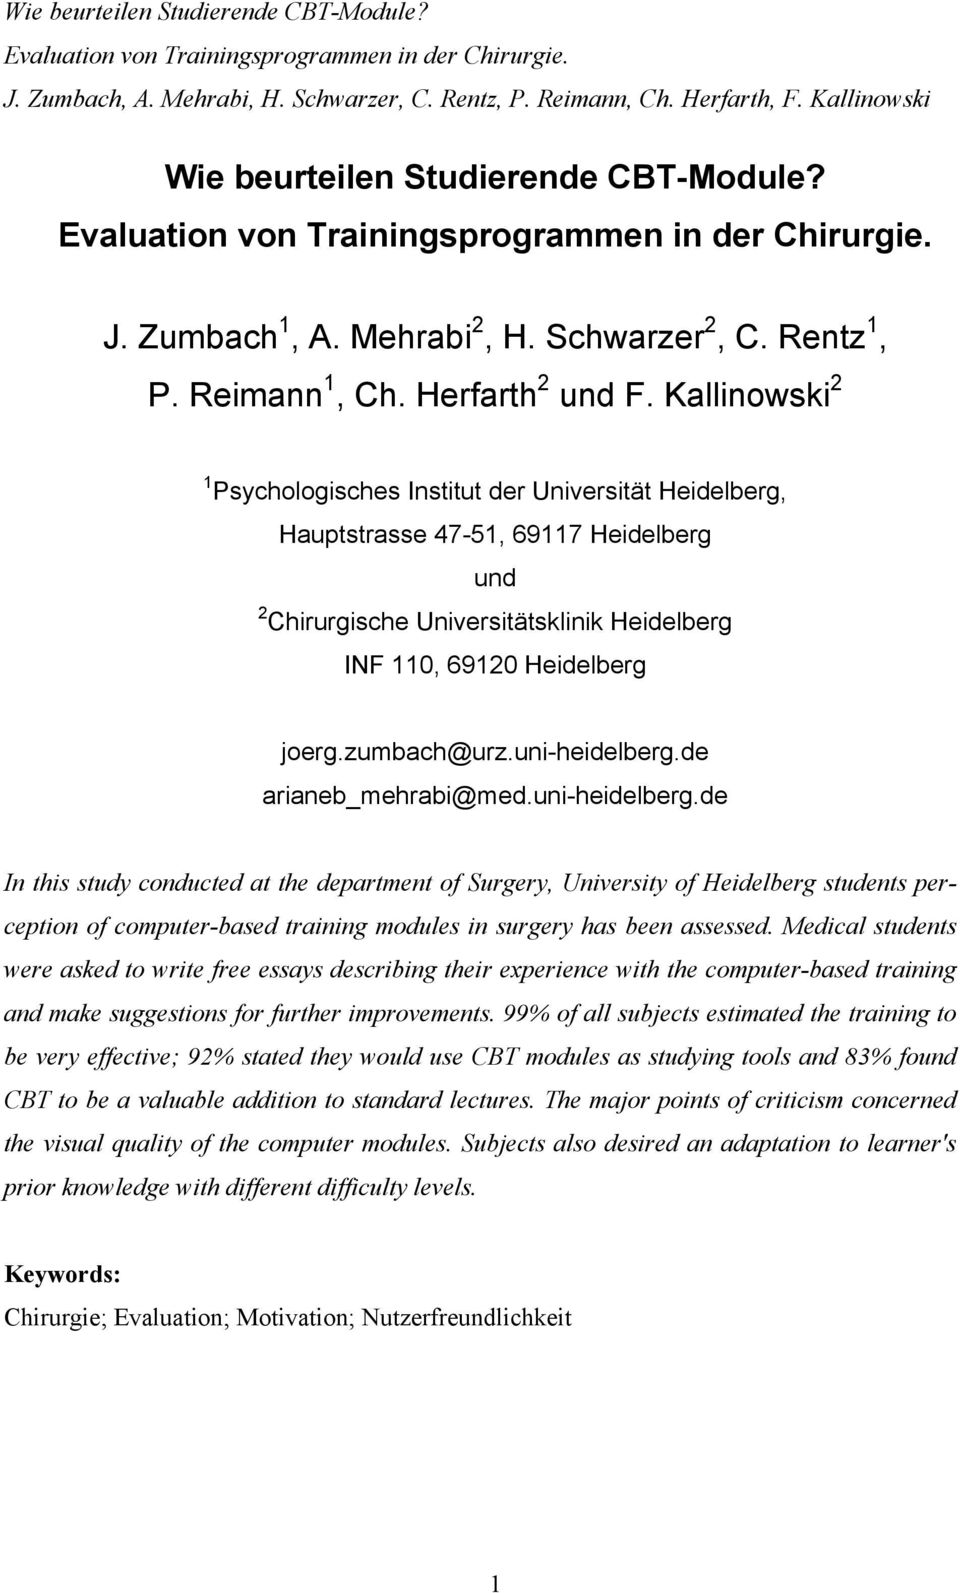 uni-heidelberg.de arianeb_mehrabi@med.uni-heidelberg.de In this study conducted at the department of Surgery, University of Heidelberg students perception of computer-based training modules in surgery has been assessed.